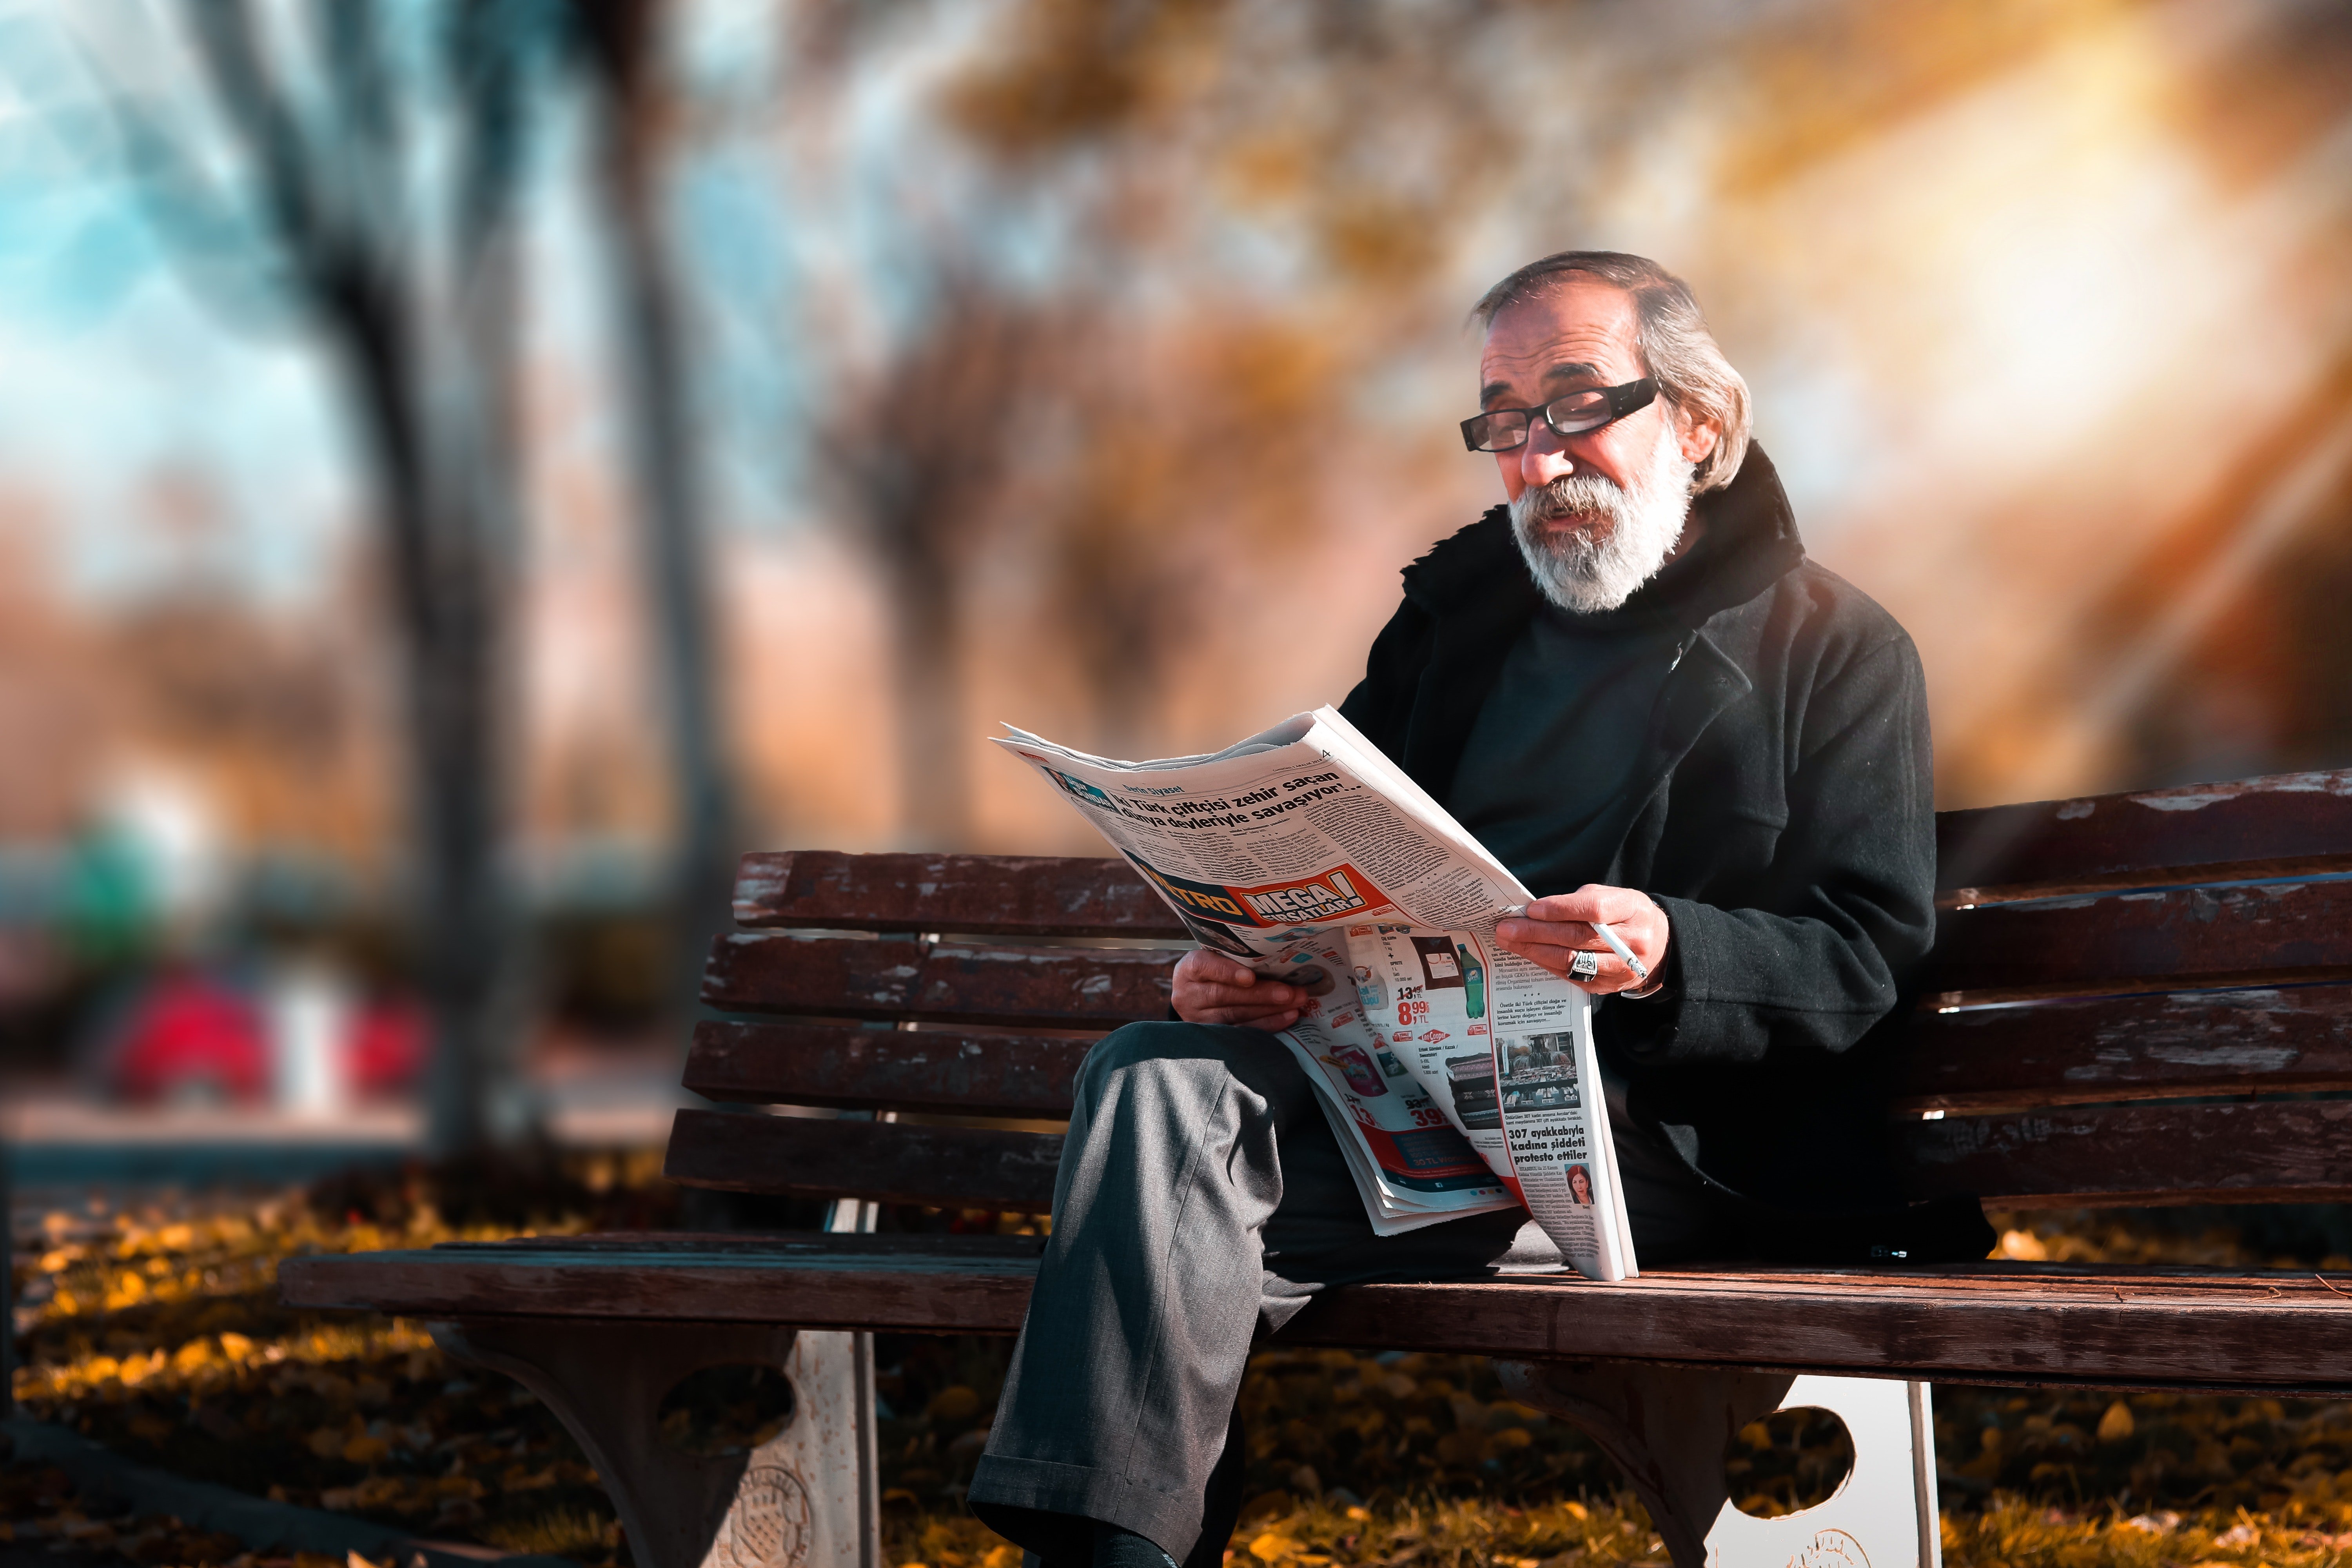 An old man reading a newspaper | Source: Pexels